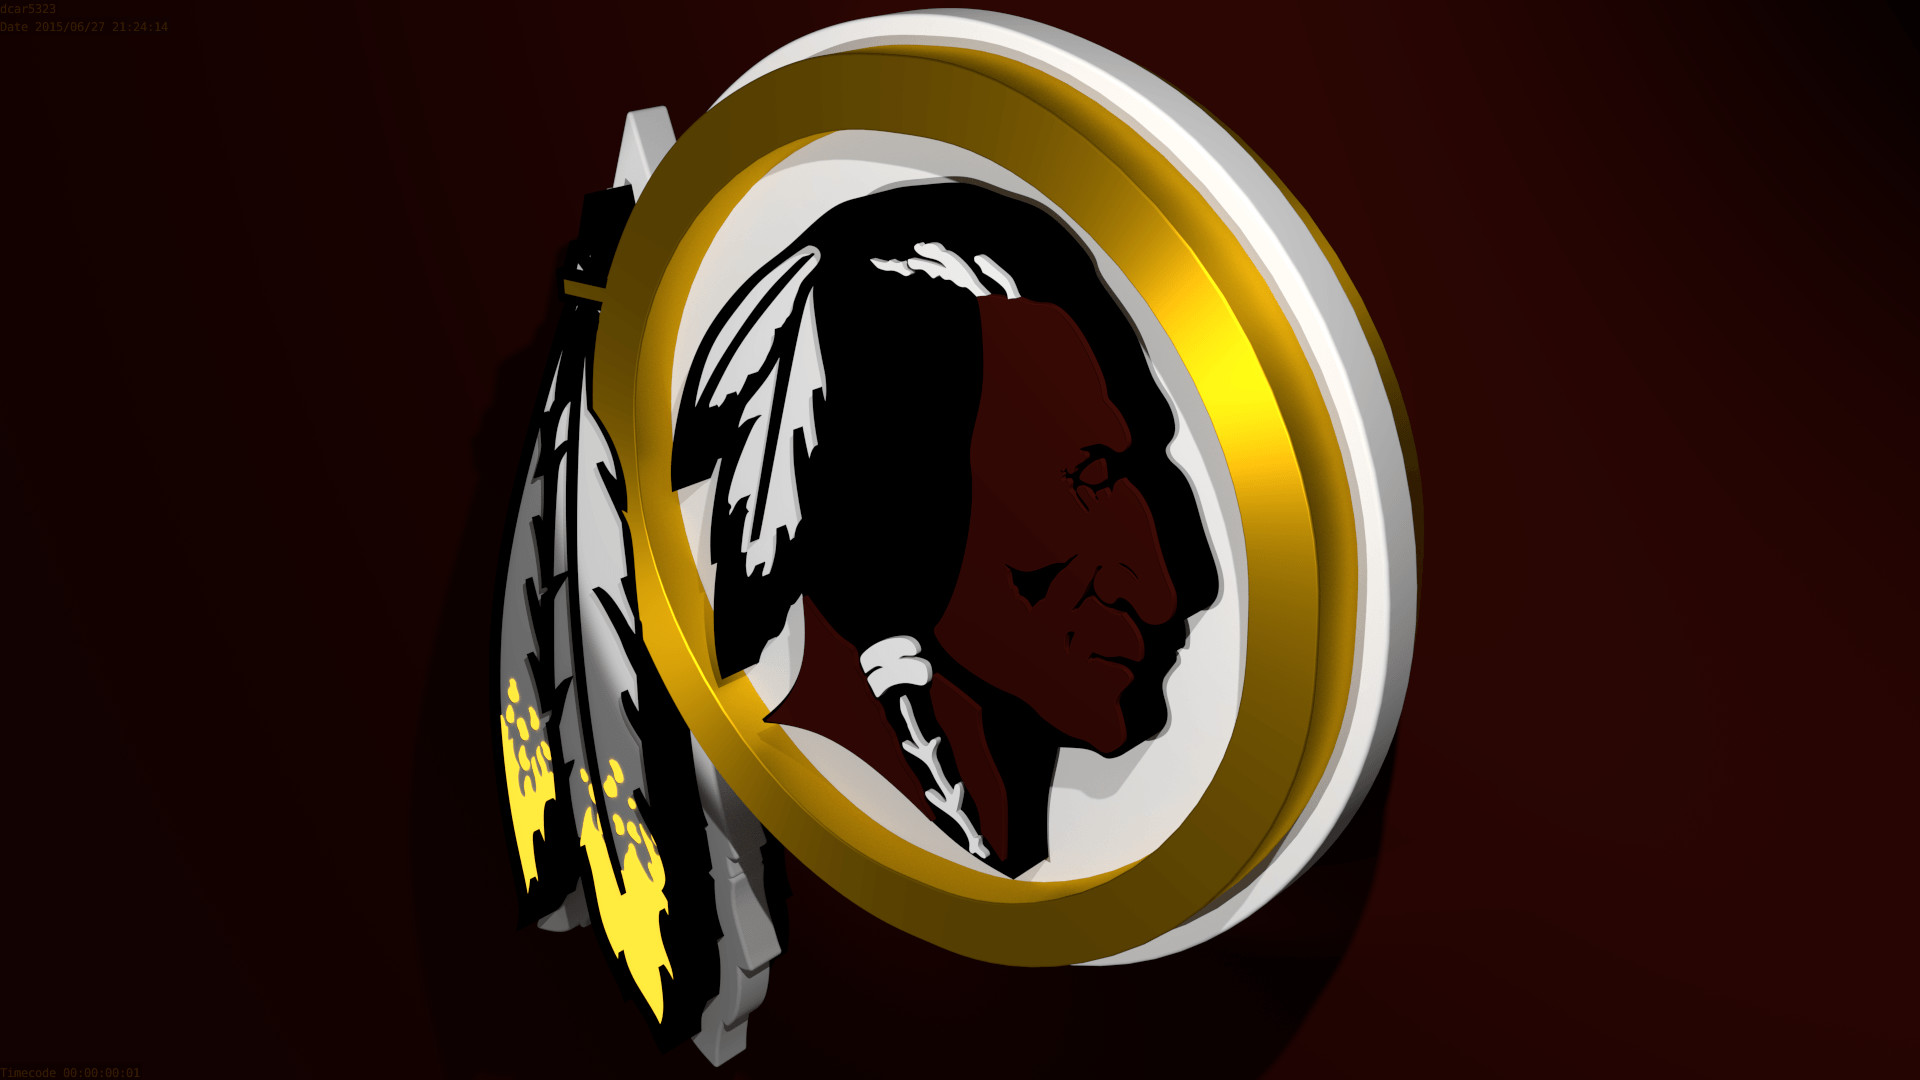 1920x1080 Redskins Wallpaper HD | Wallpapers, Backgrounds, Images, Art Photos.